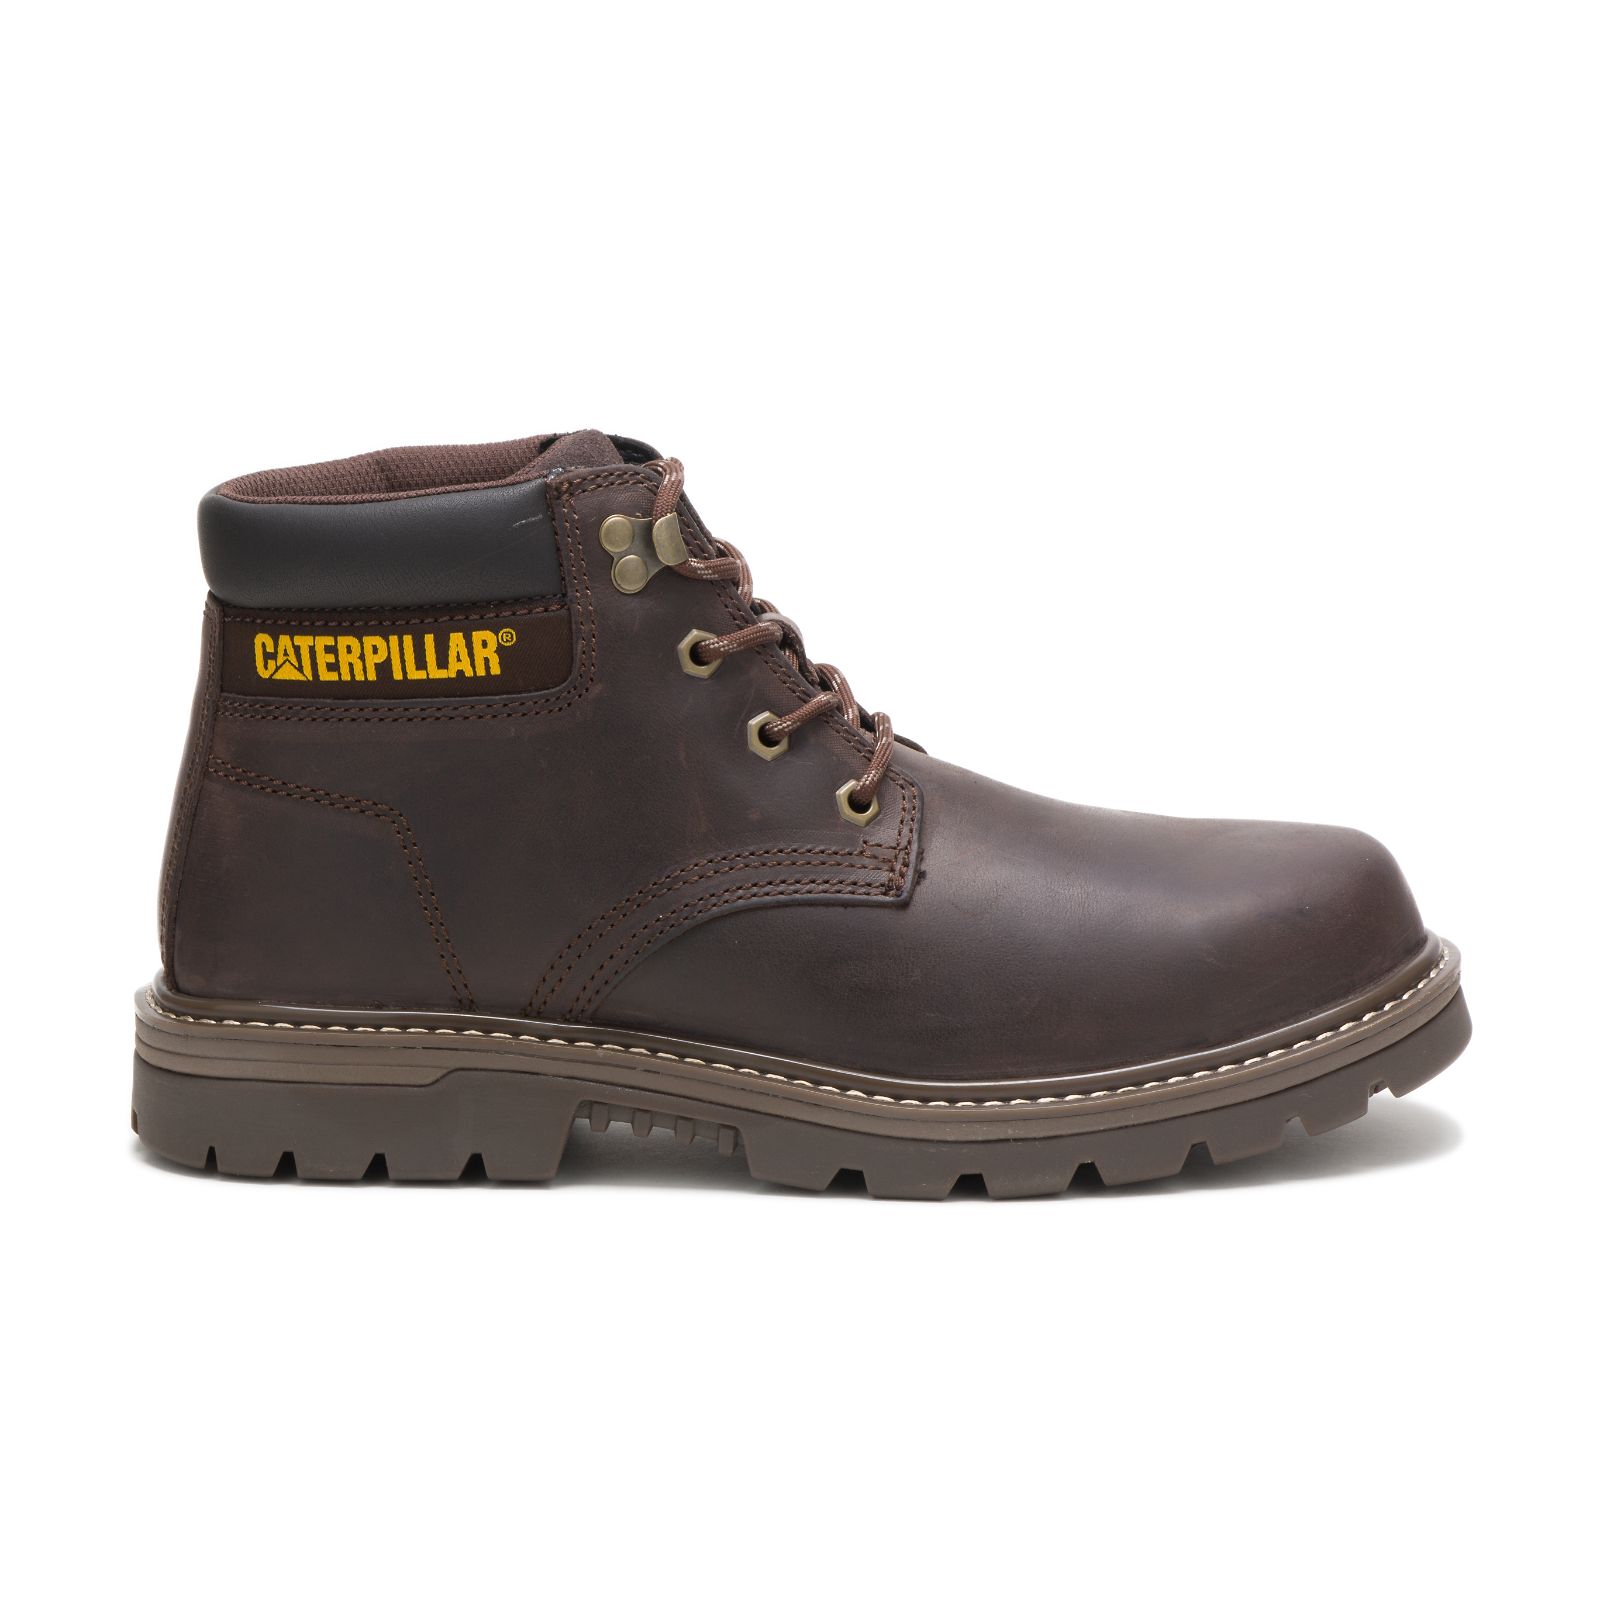 Men's Caterpillar Outbase Steel Toe Work Boots Coffee | Cat-947521